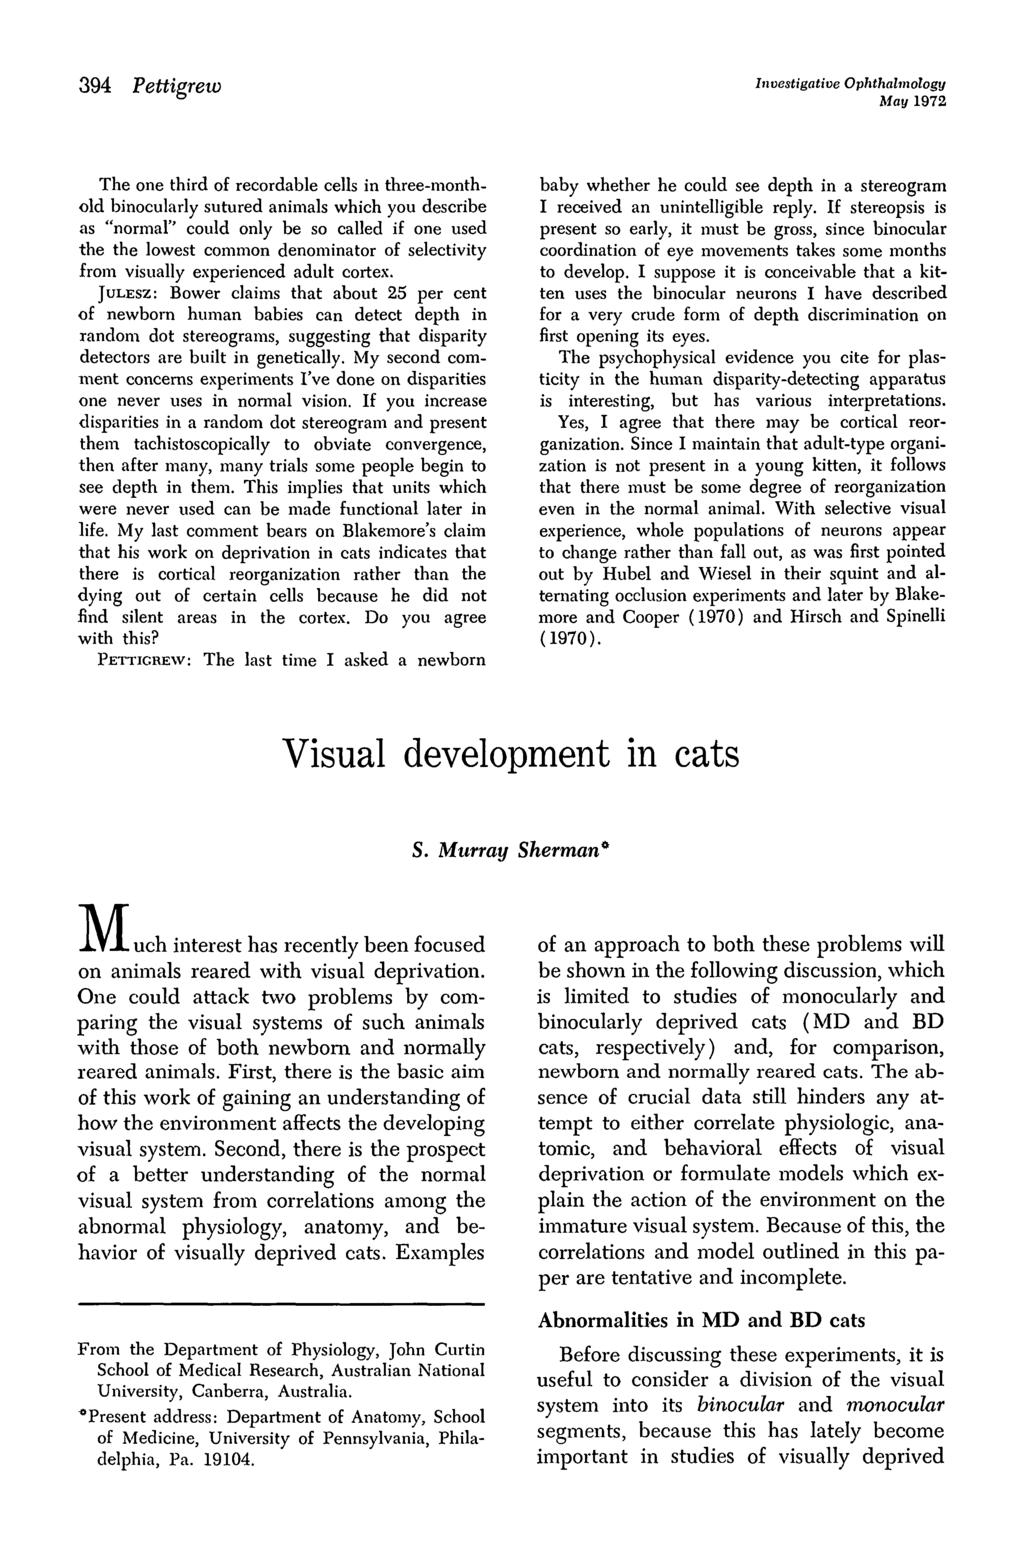 394 Pettigrew Investigative Ophthalmology May 1972 The one third of recordable cells in three-monthold binocularly sutured animals which you describe as "normal" could only be so called if one used